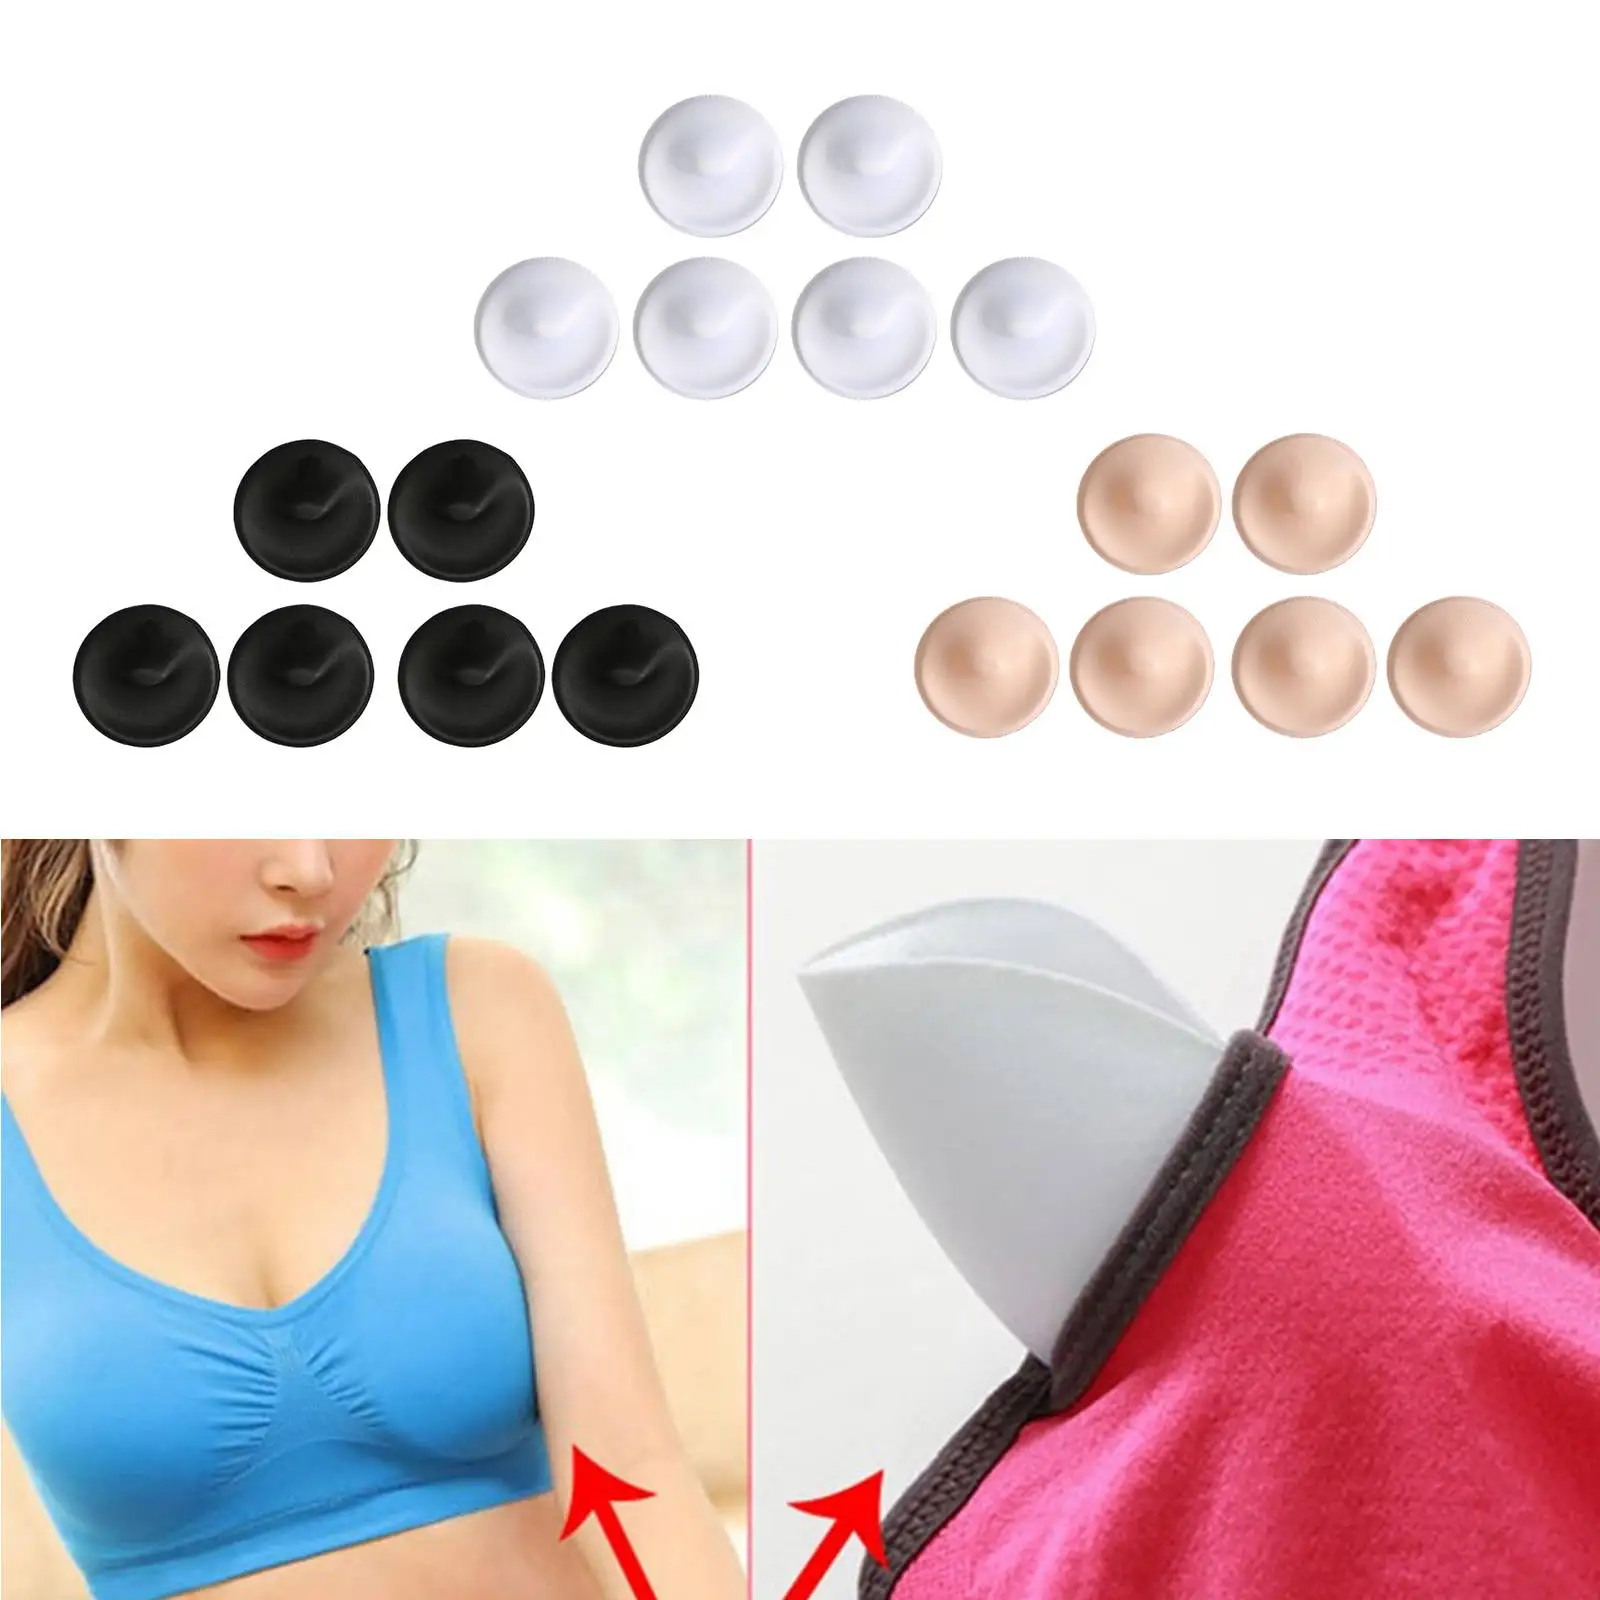 TopBine 3 pairs Round Soft Bra Inserts Pads Removable Sport Bra Cups inserts Mastectomy Bra Inserts For Bikini Top Swimsuit 